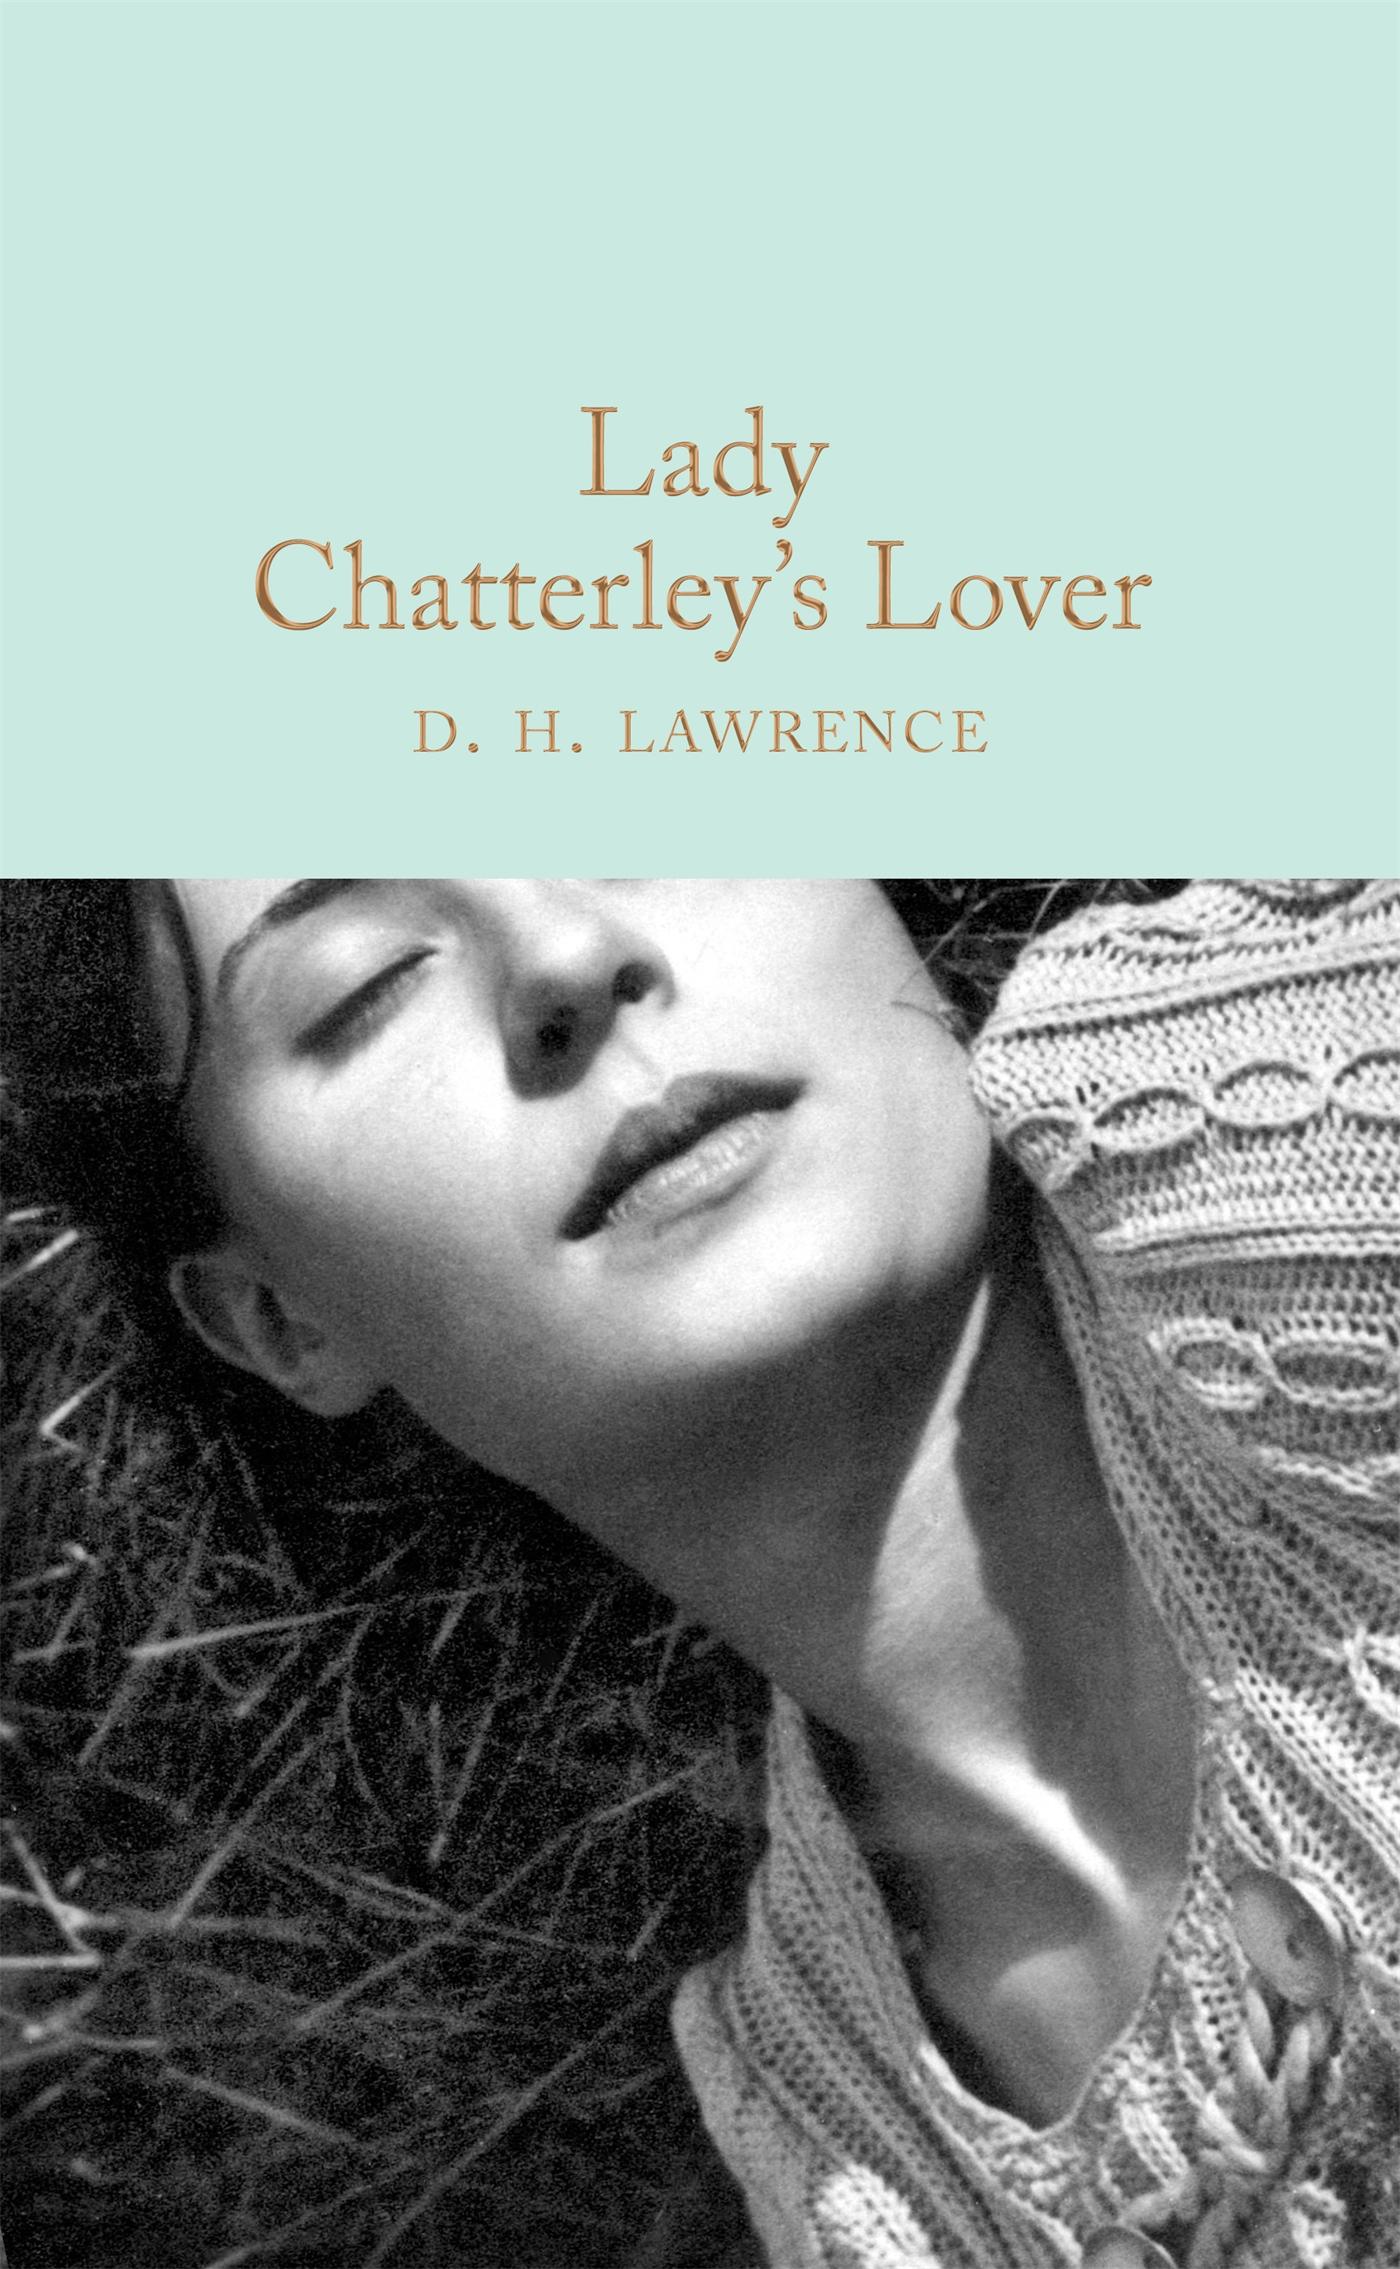 Lady Chatterley's Lover | D. H. Lawrence | Buch | 430 S. | Englisch | 2017 | Pan Macmillan | EAN 9781509843190 - Lawrence, D. H.